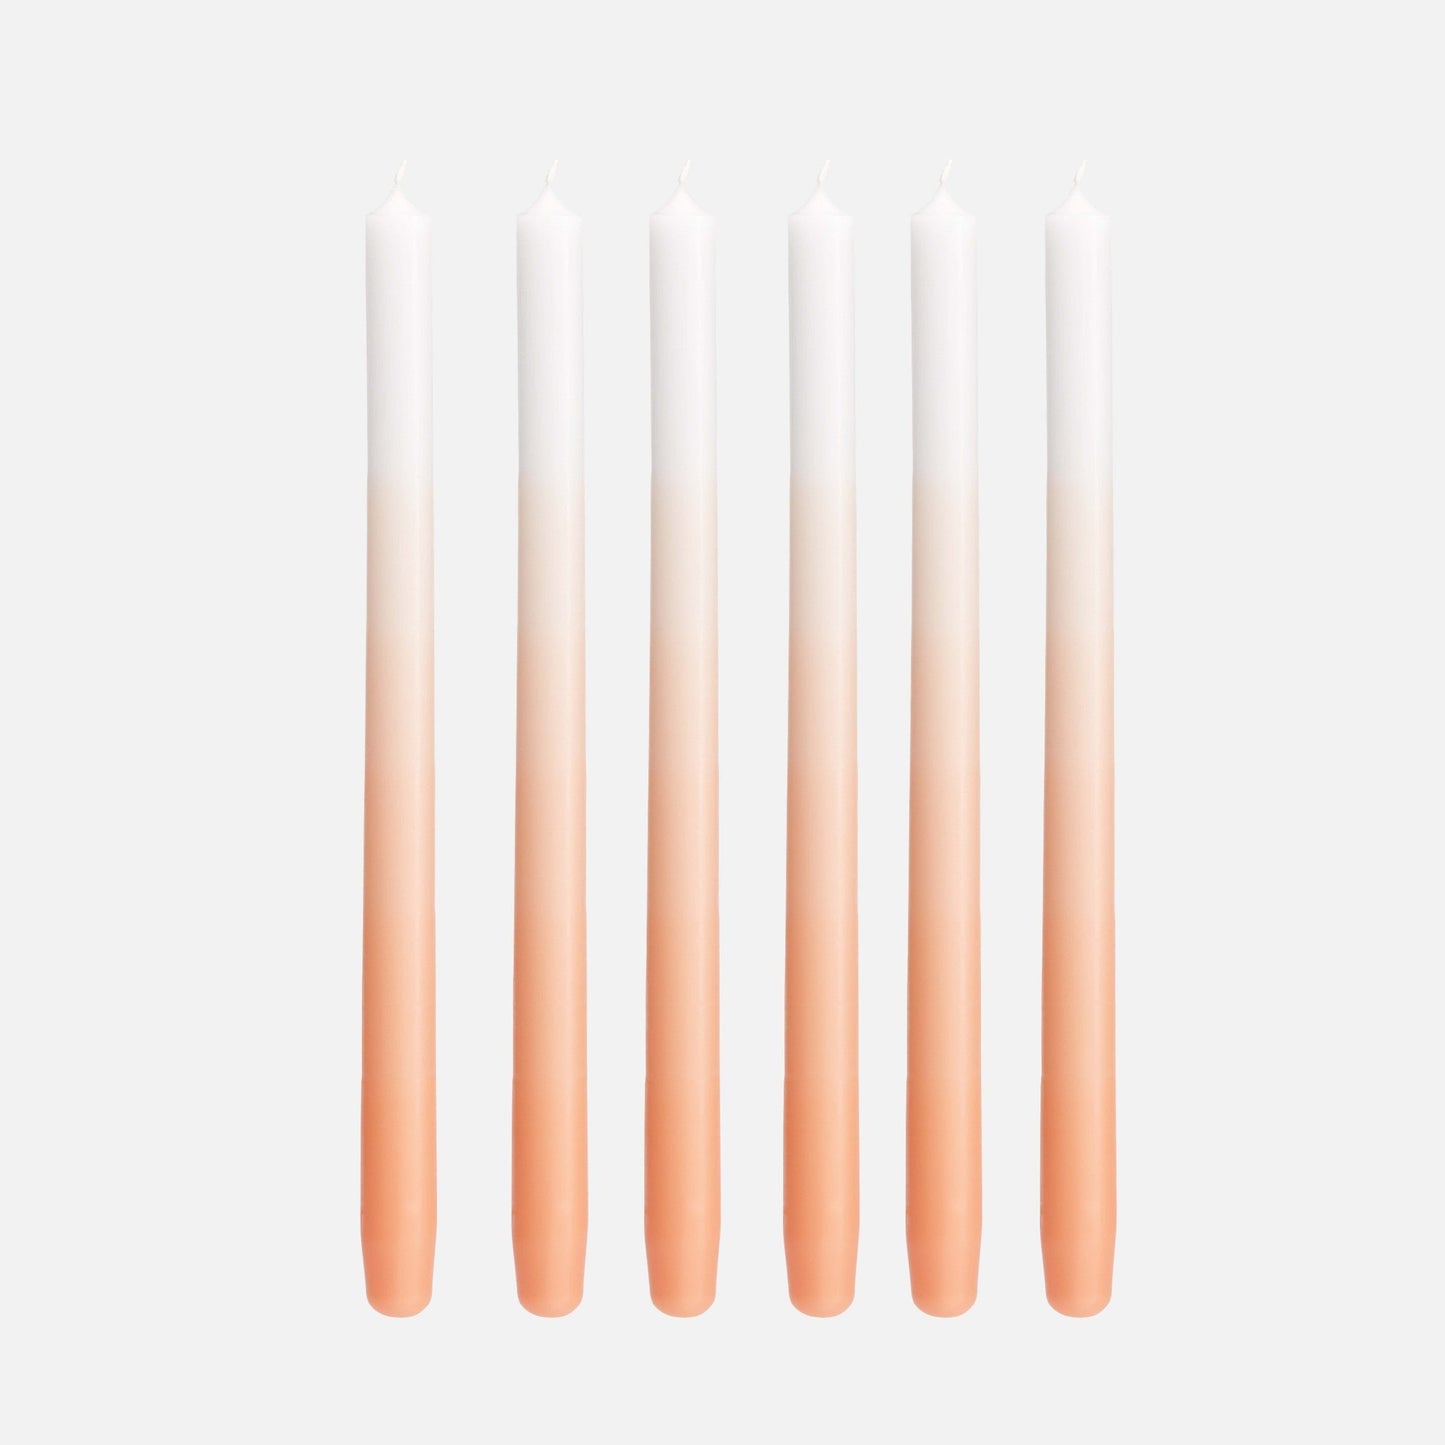 GRADIENT CANDLES | DUTCH ORANGE (set of 6, in a gift box)